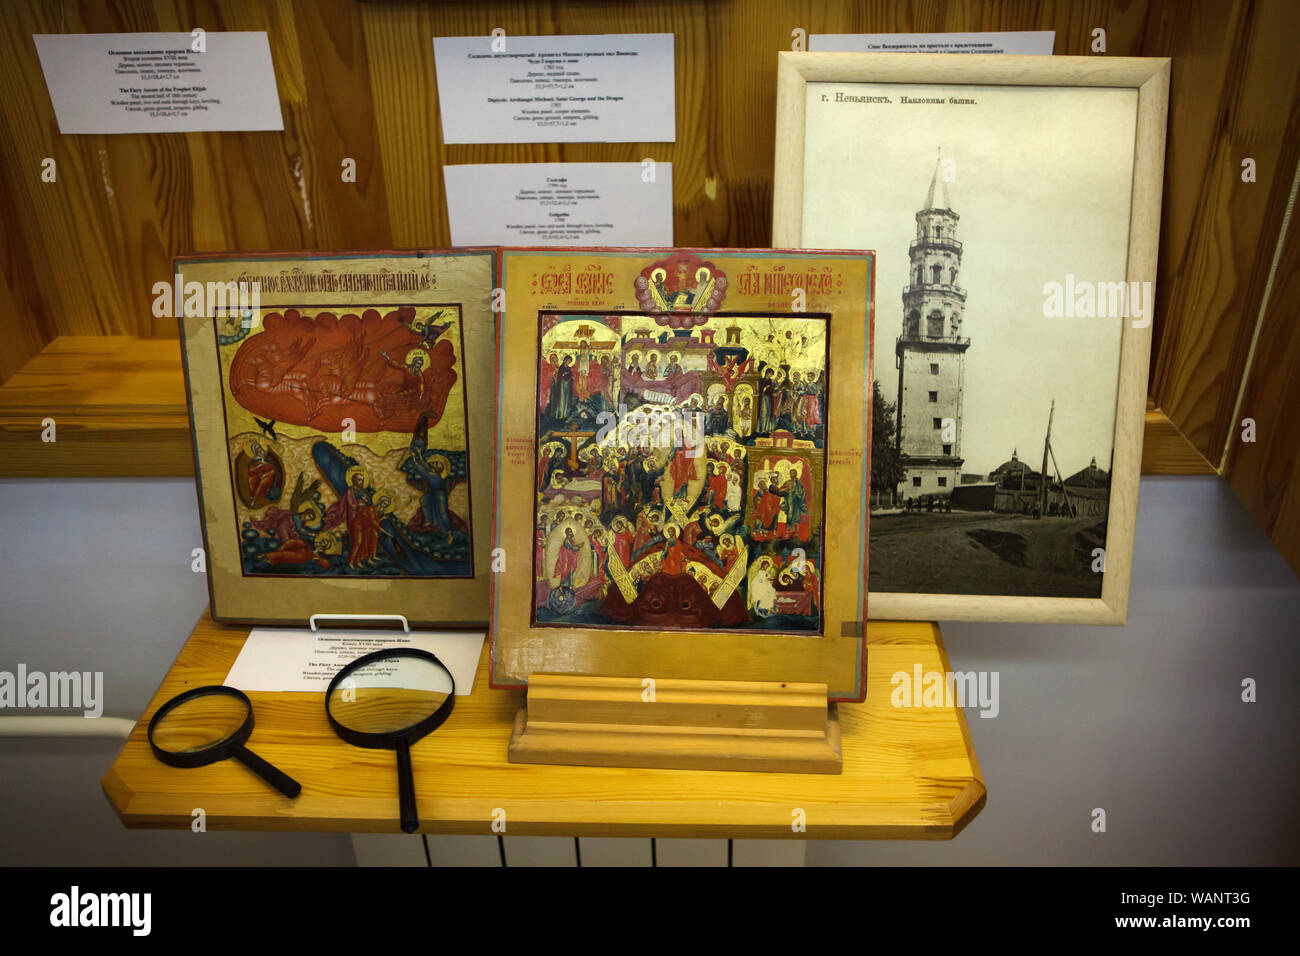 Nevyansk icons on display in the Nevyansk Icon Museum (Nevyanskaya Ikona) in Yekaterinburg, Russia. The leaning tower in the town of Nevyansk is depicted in the old photograph at the right. Stock Photo